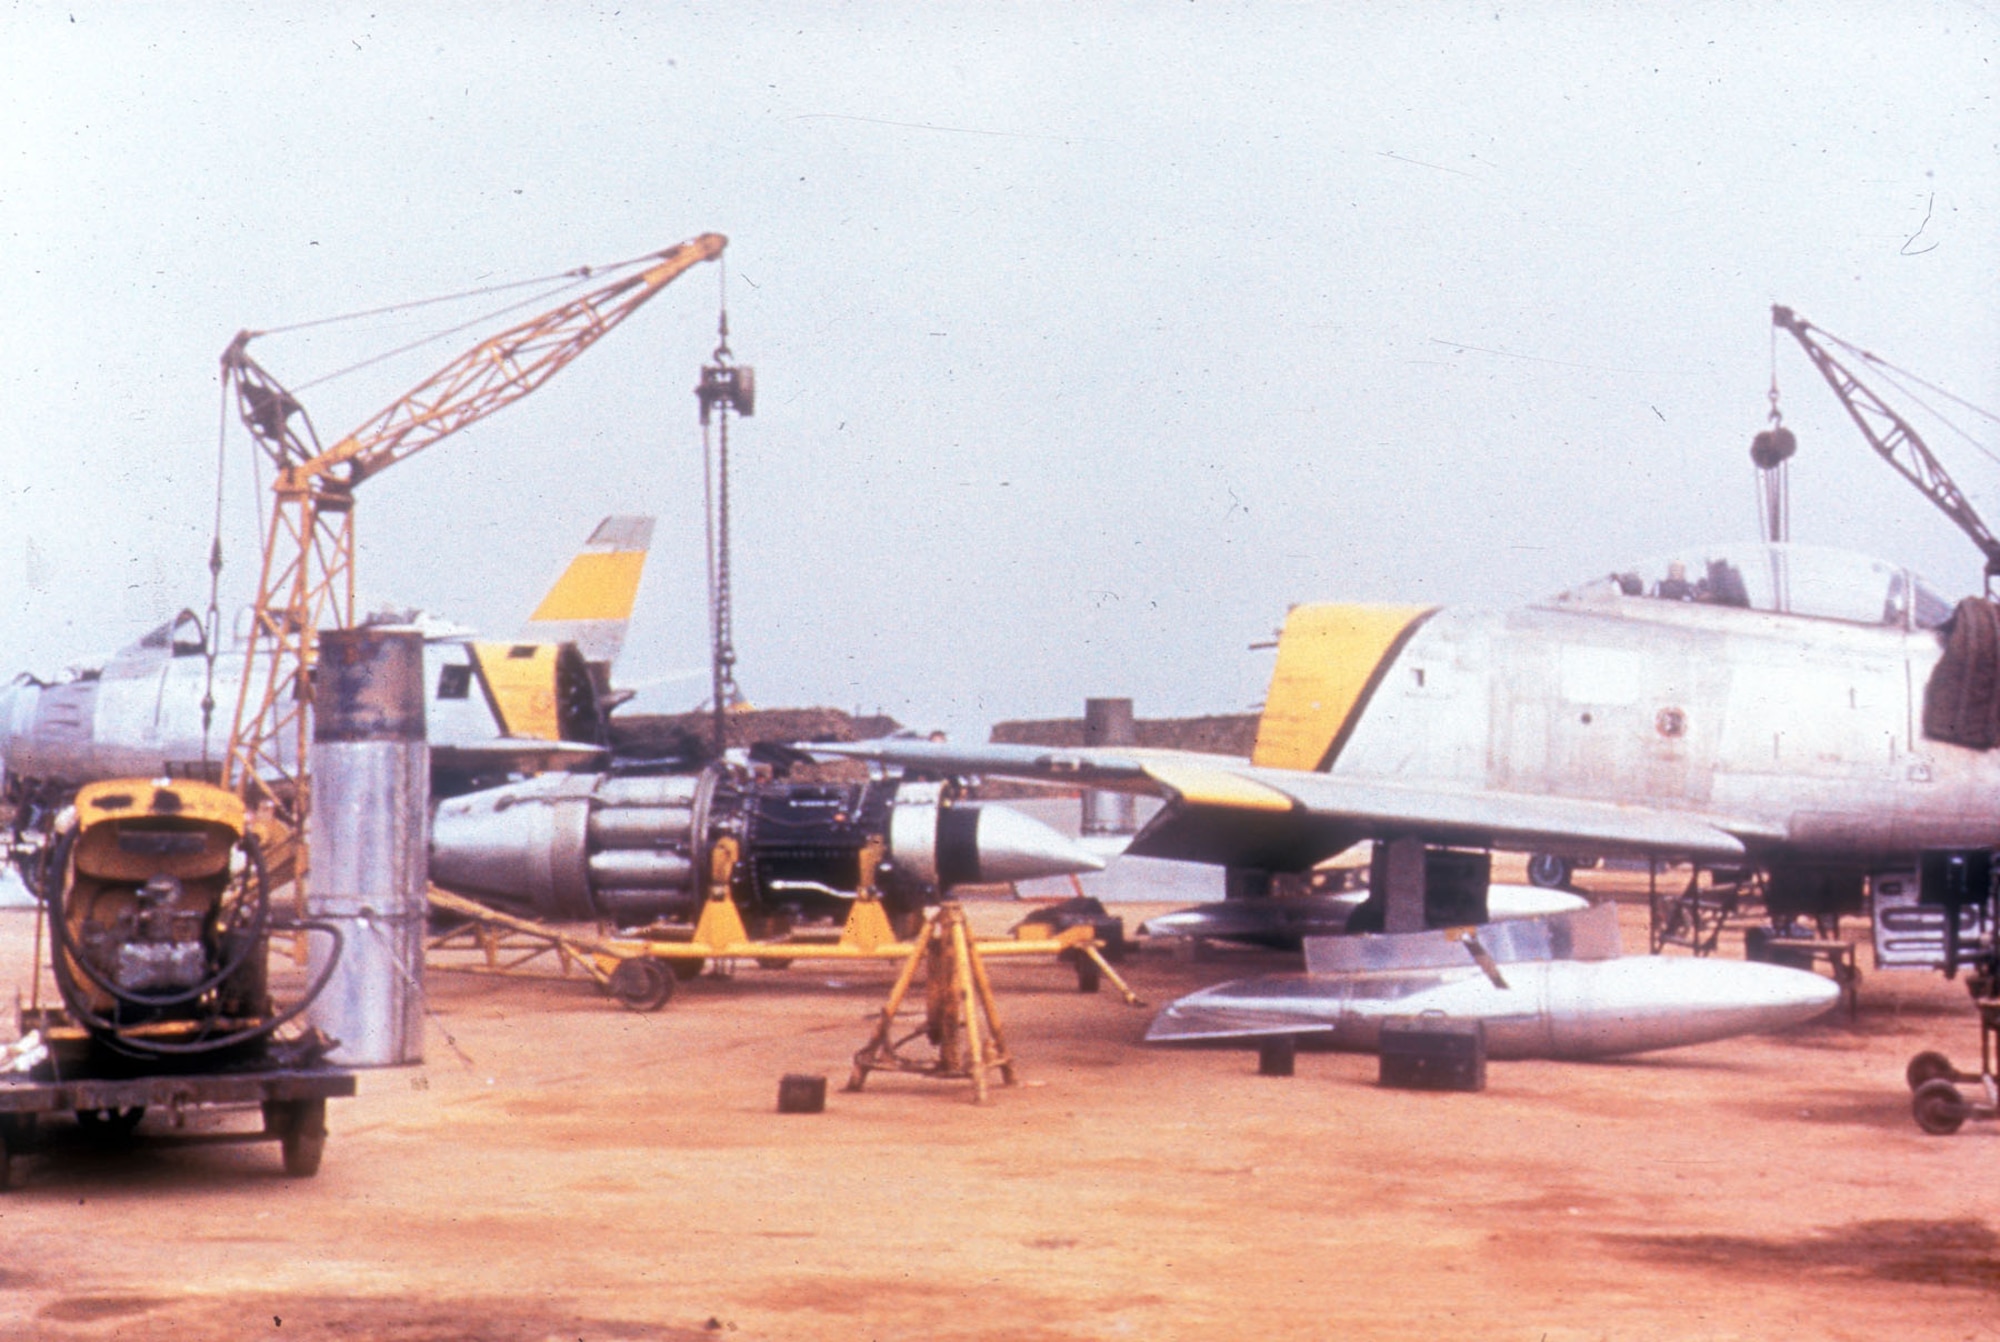 J47 engine change on an F-86E at Kimpo Air Base in 1952. (U.S. Air Force photo)